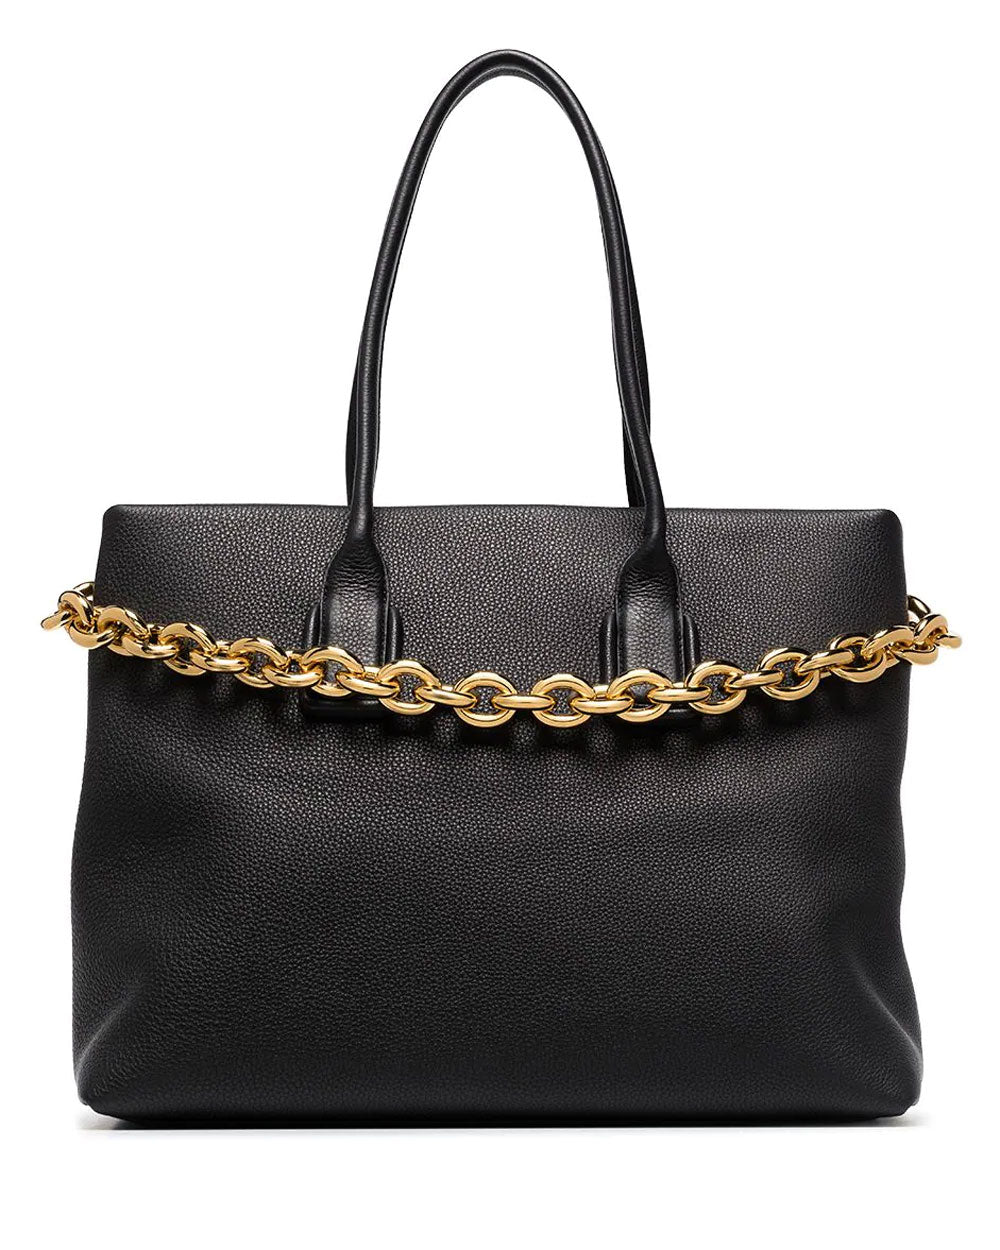 Black Tote with Gold Chain